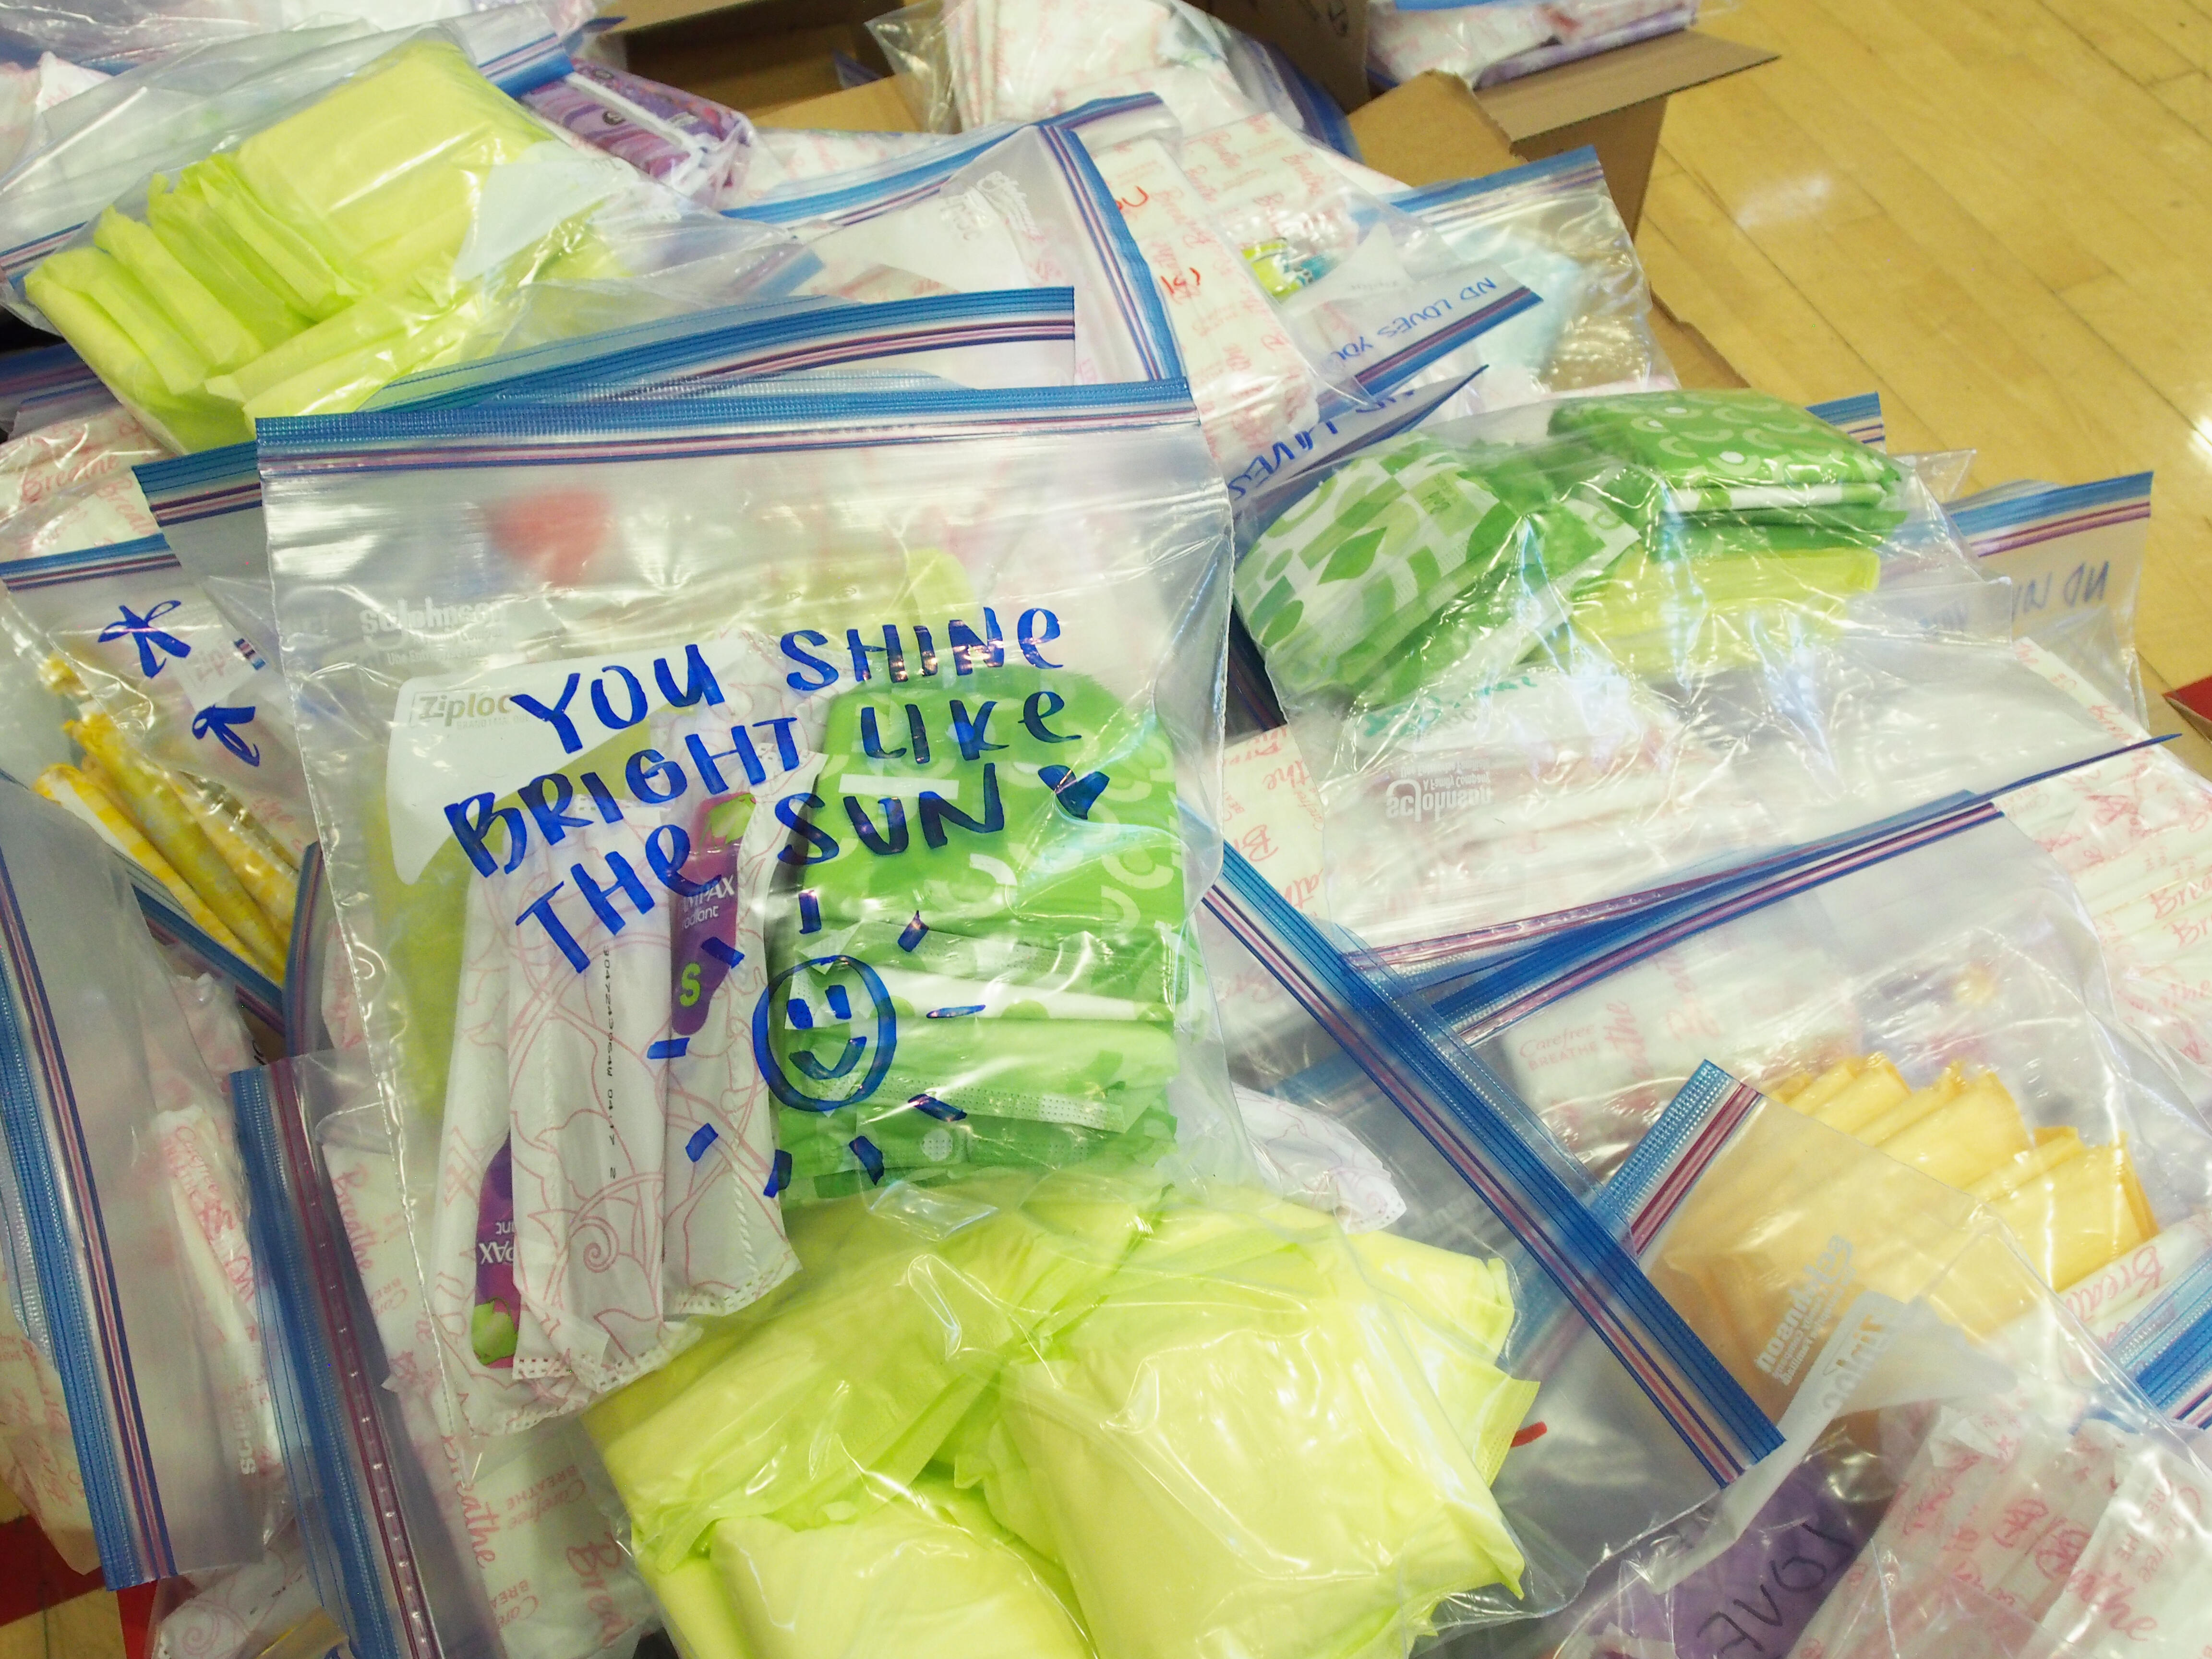 hygiene kits: one package says, "You shine bright like the sun" and a drawing of a sun with a smiley face